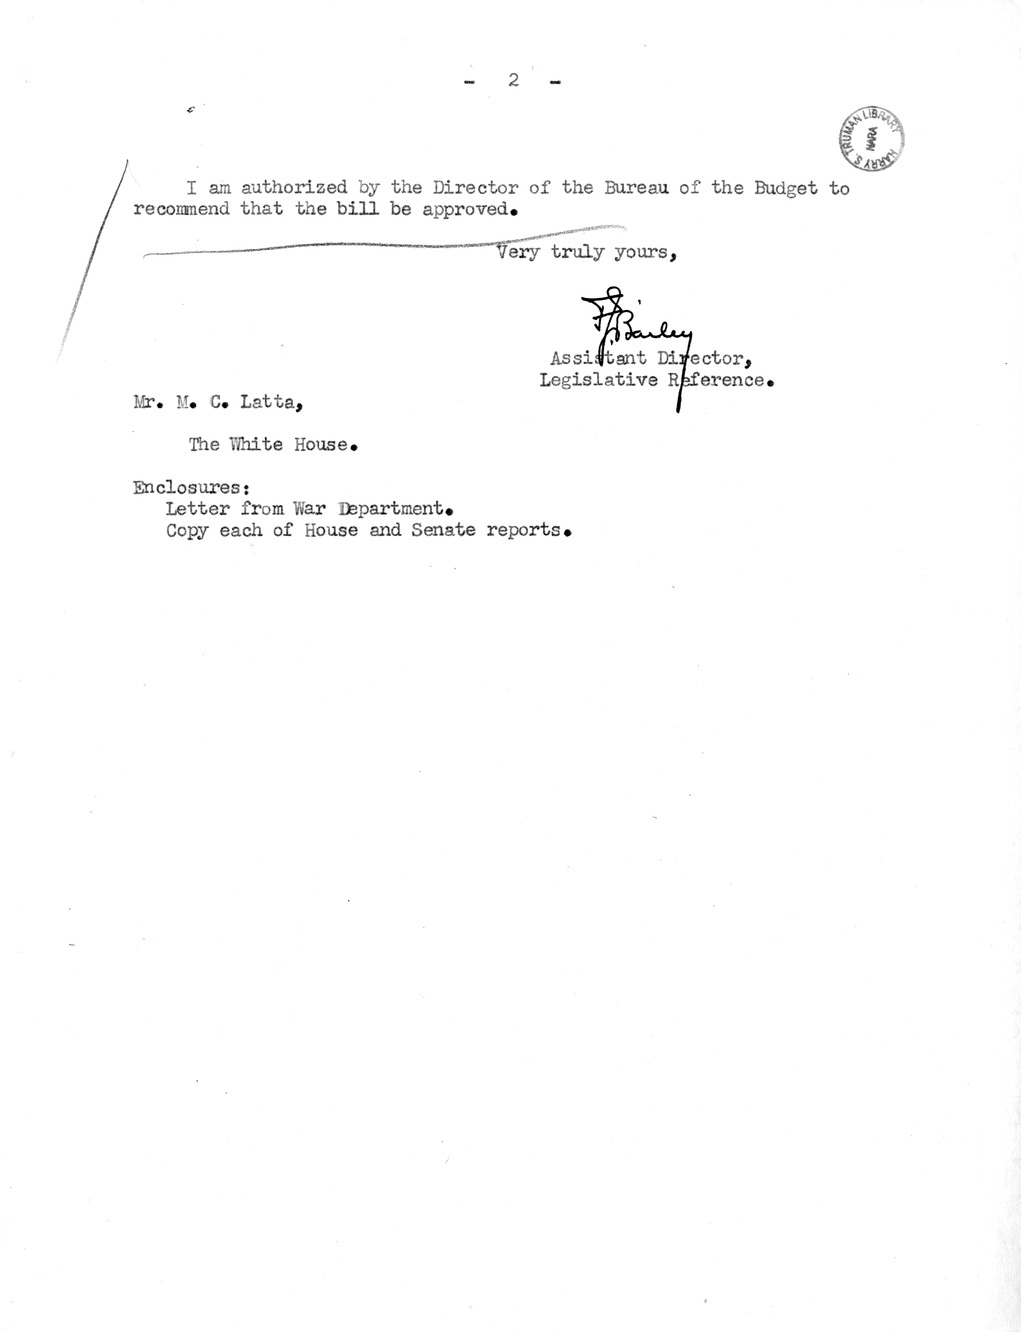 Memorandum from Frederick J. Bailey to M. C. Latta, H. R. 4249, For the Relief of Lucy Delgado and Irma M. Delgado, with Attachments